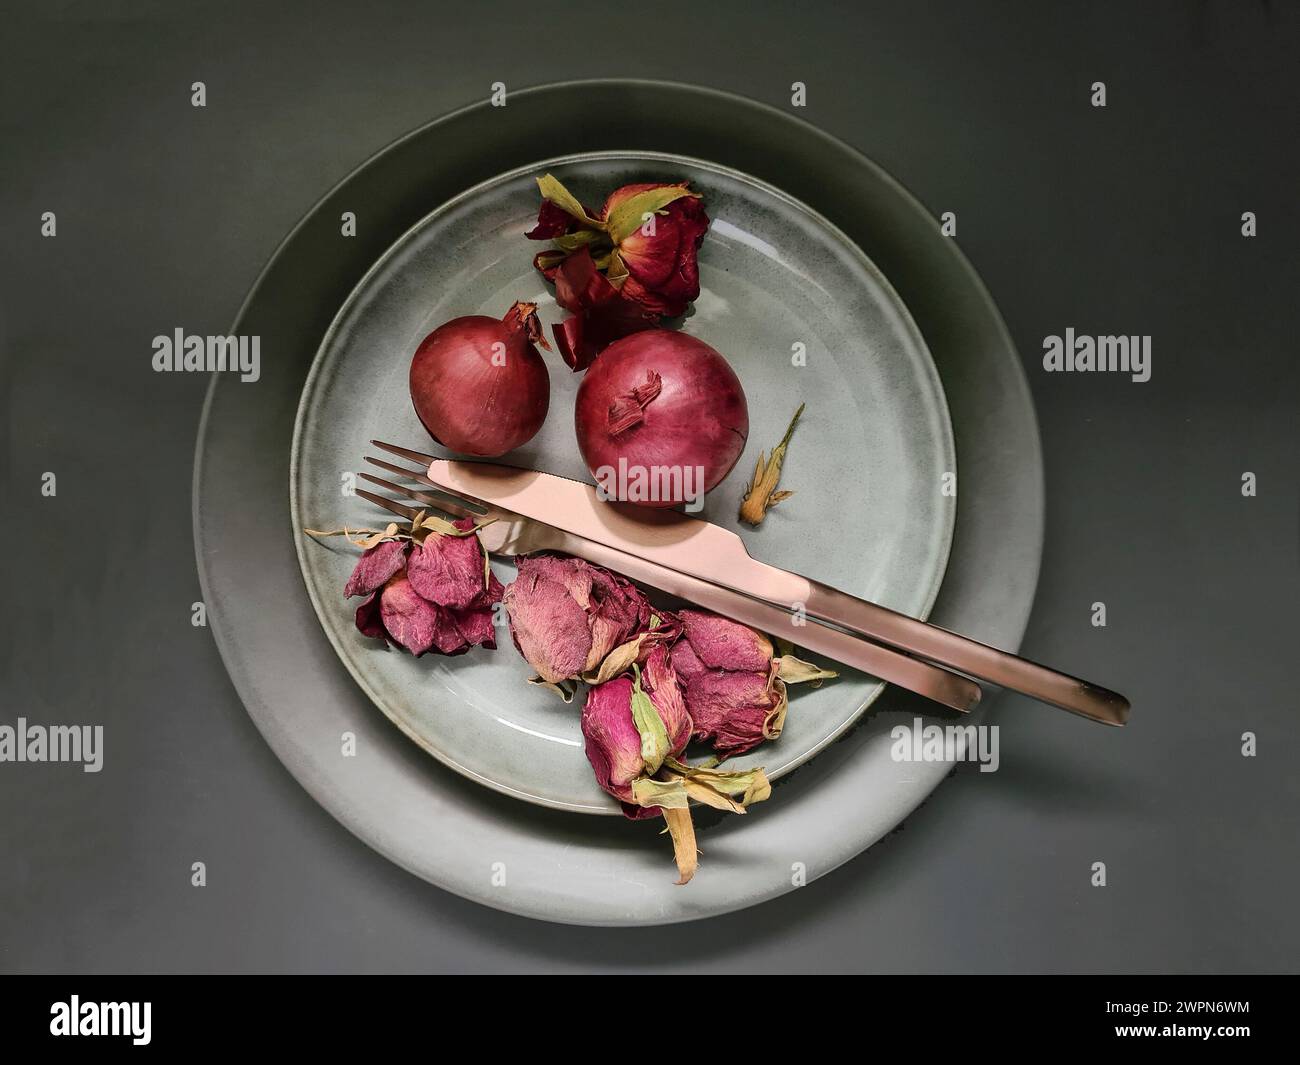 Arrangement of two whole red onions with dried rose petals next to copper-colored cutlery on a porcelain plate as a still life Stock Photo